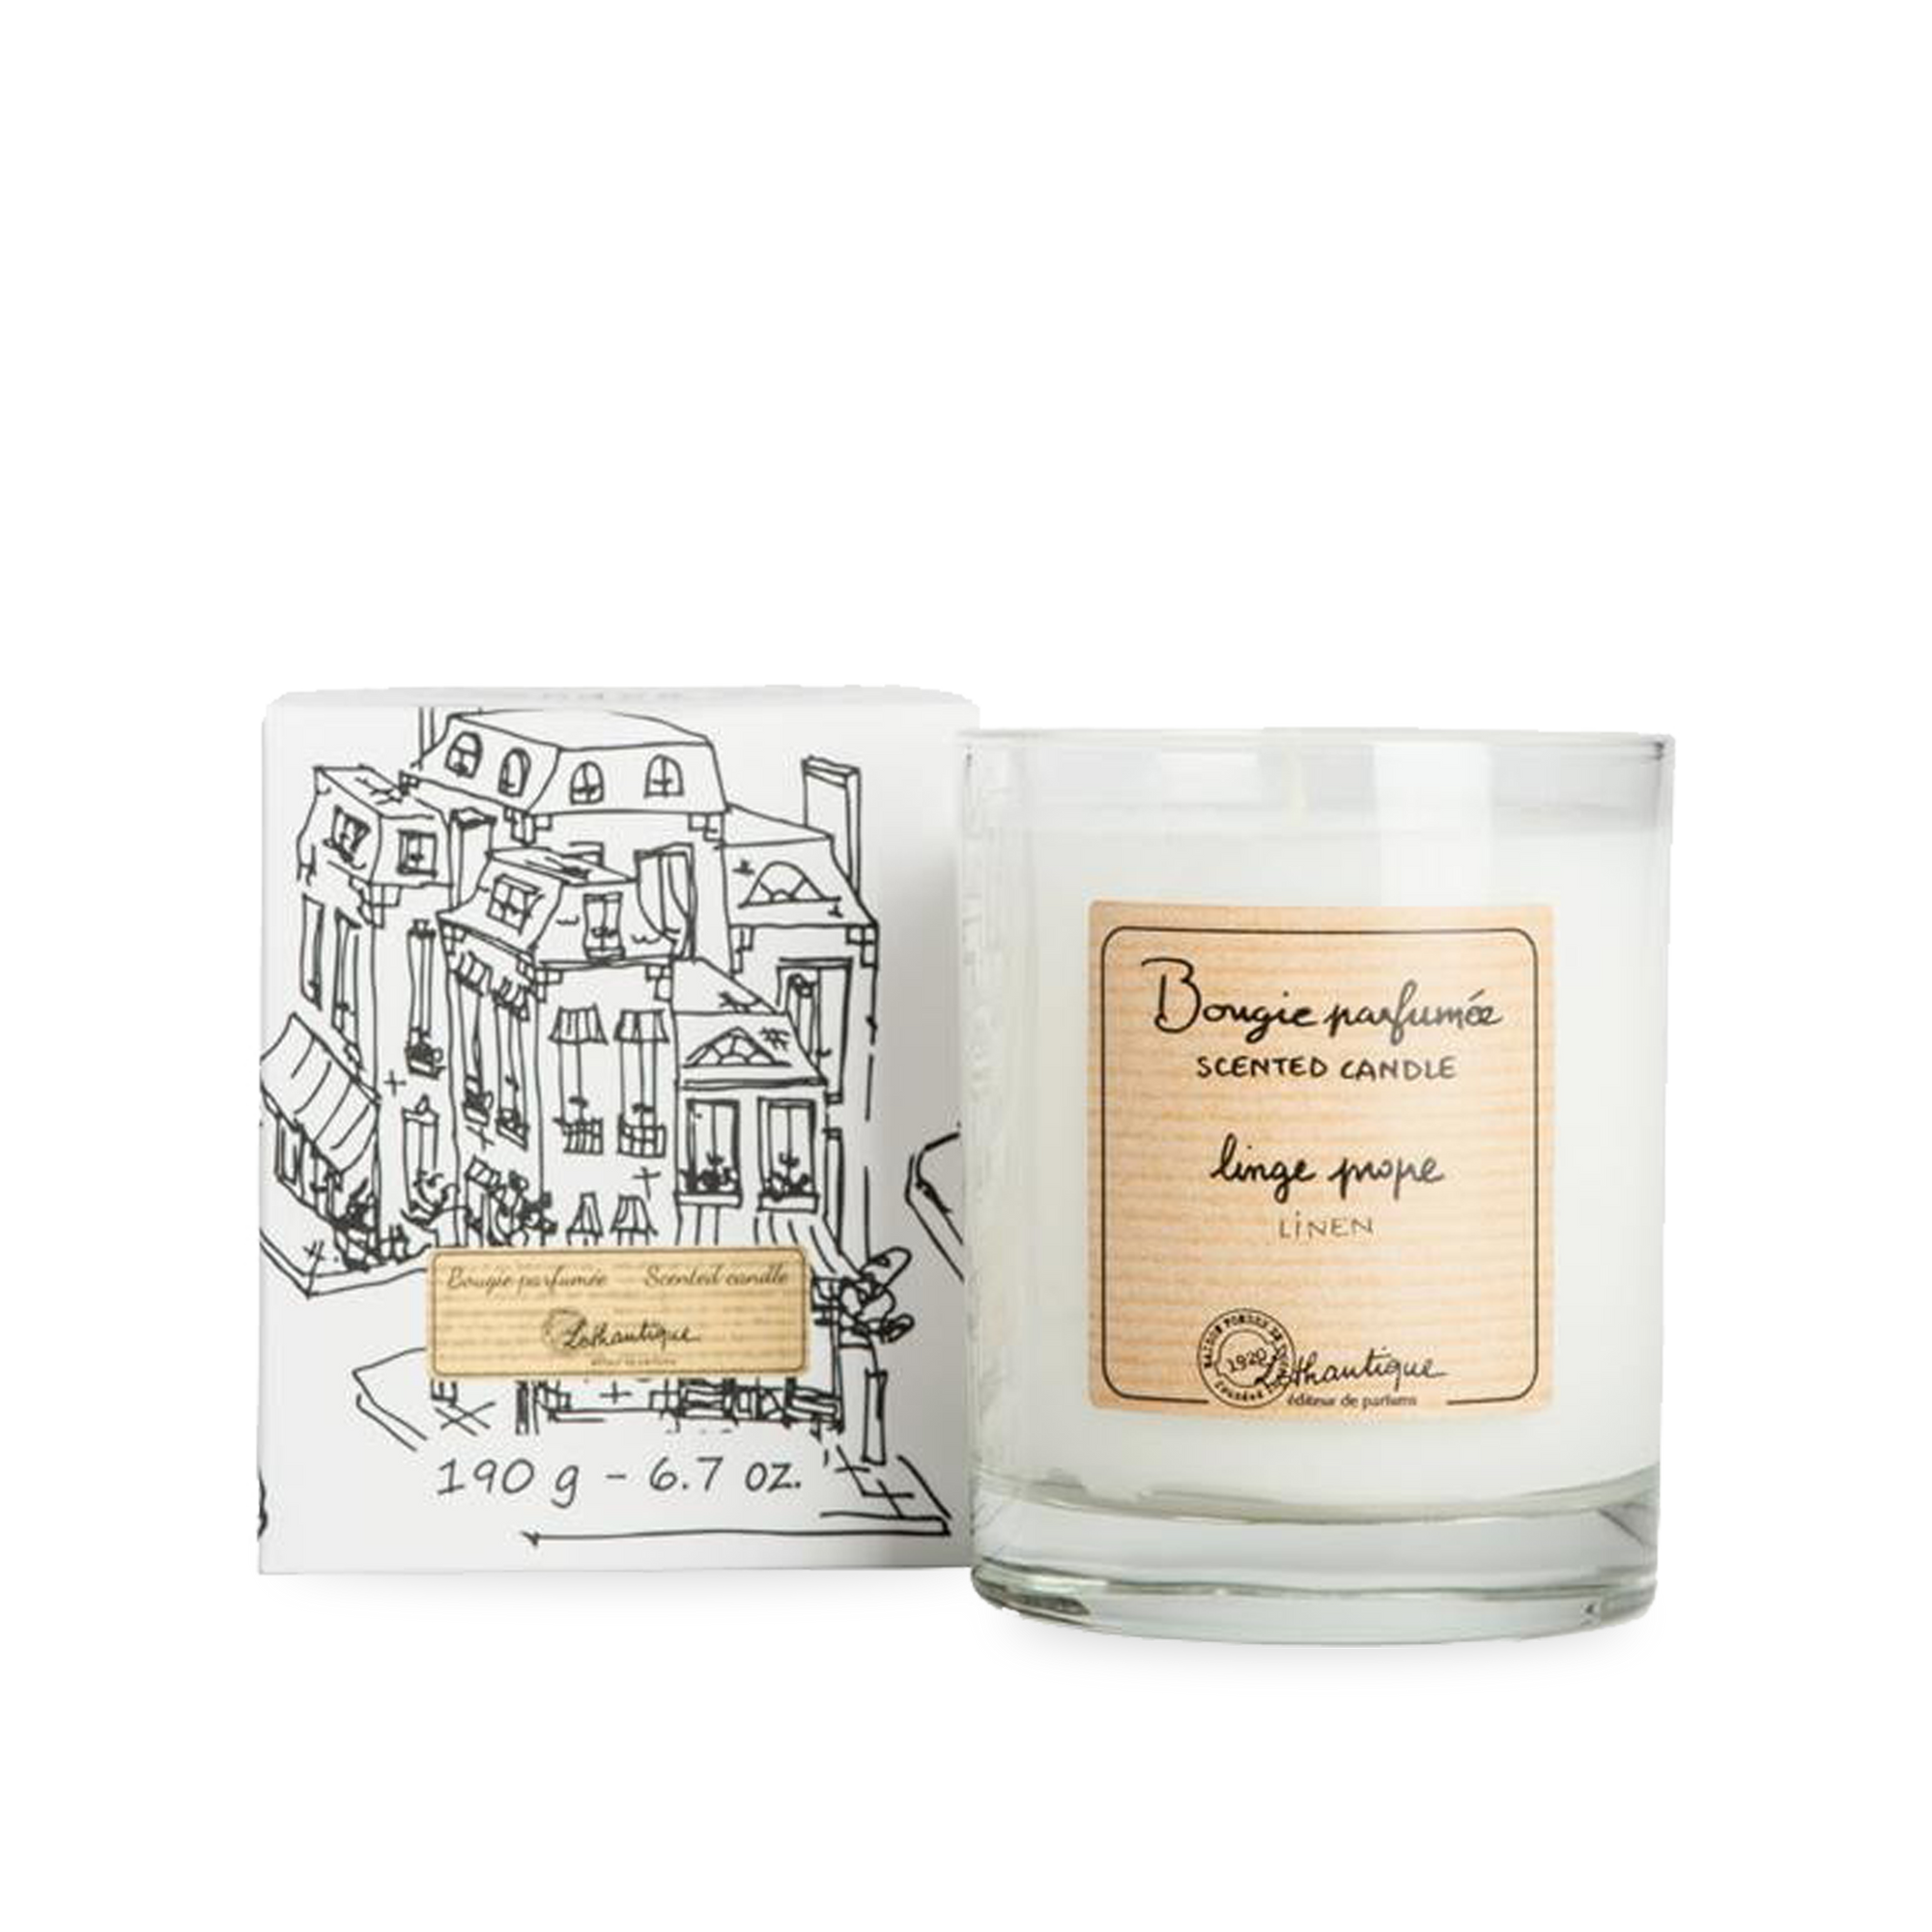 Fragrance your home with this Linen Scented Candle.